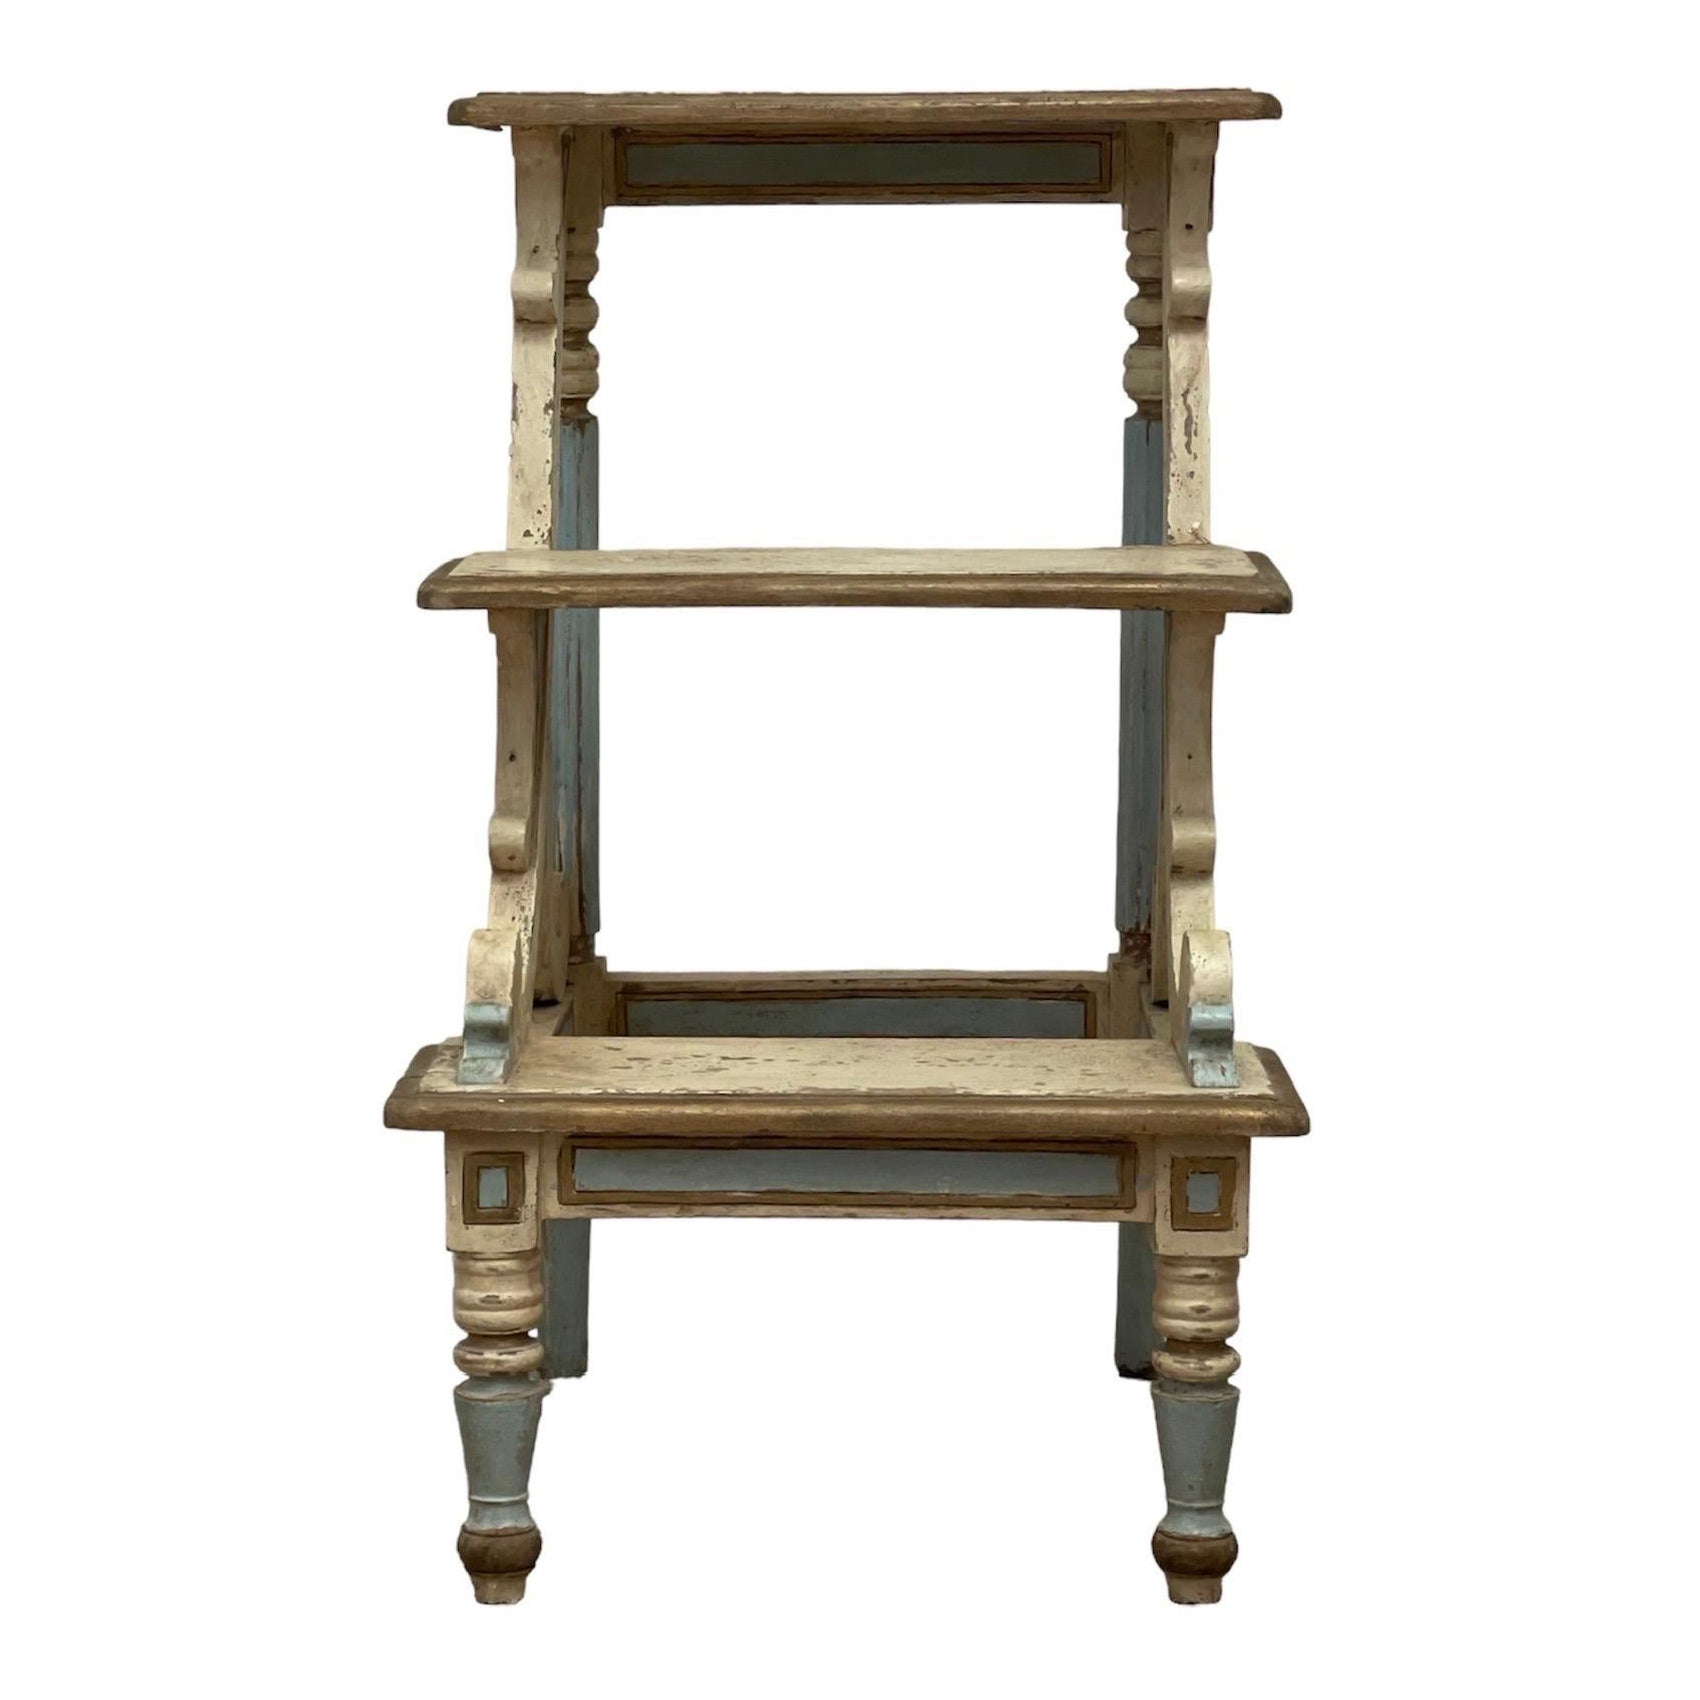 Vintage Decorative Library Steps, Tiered Table